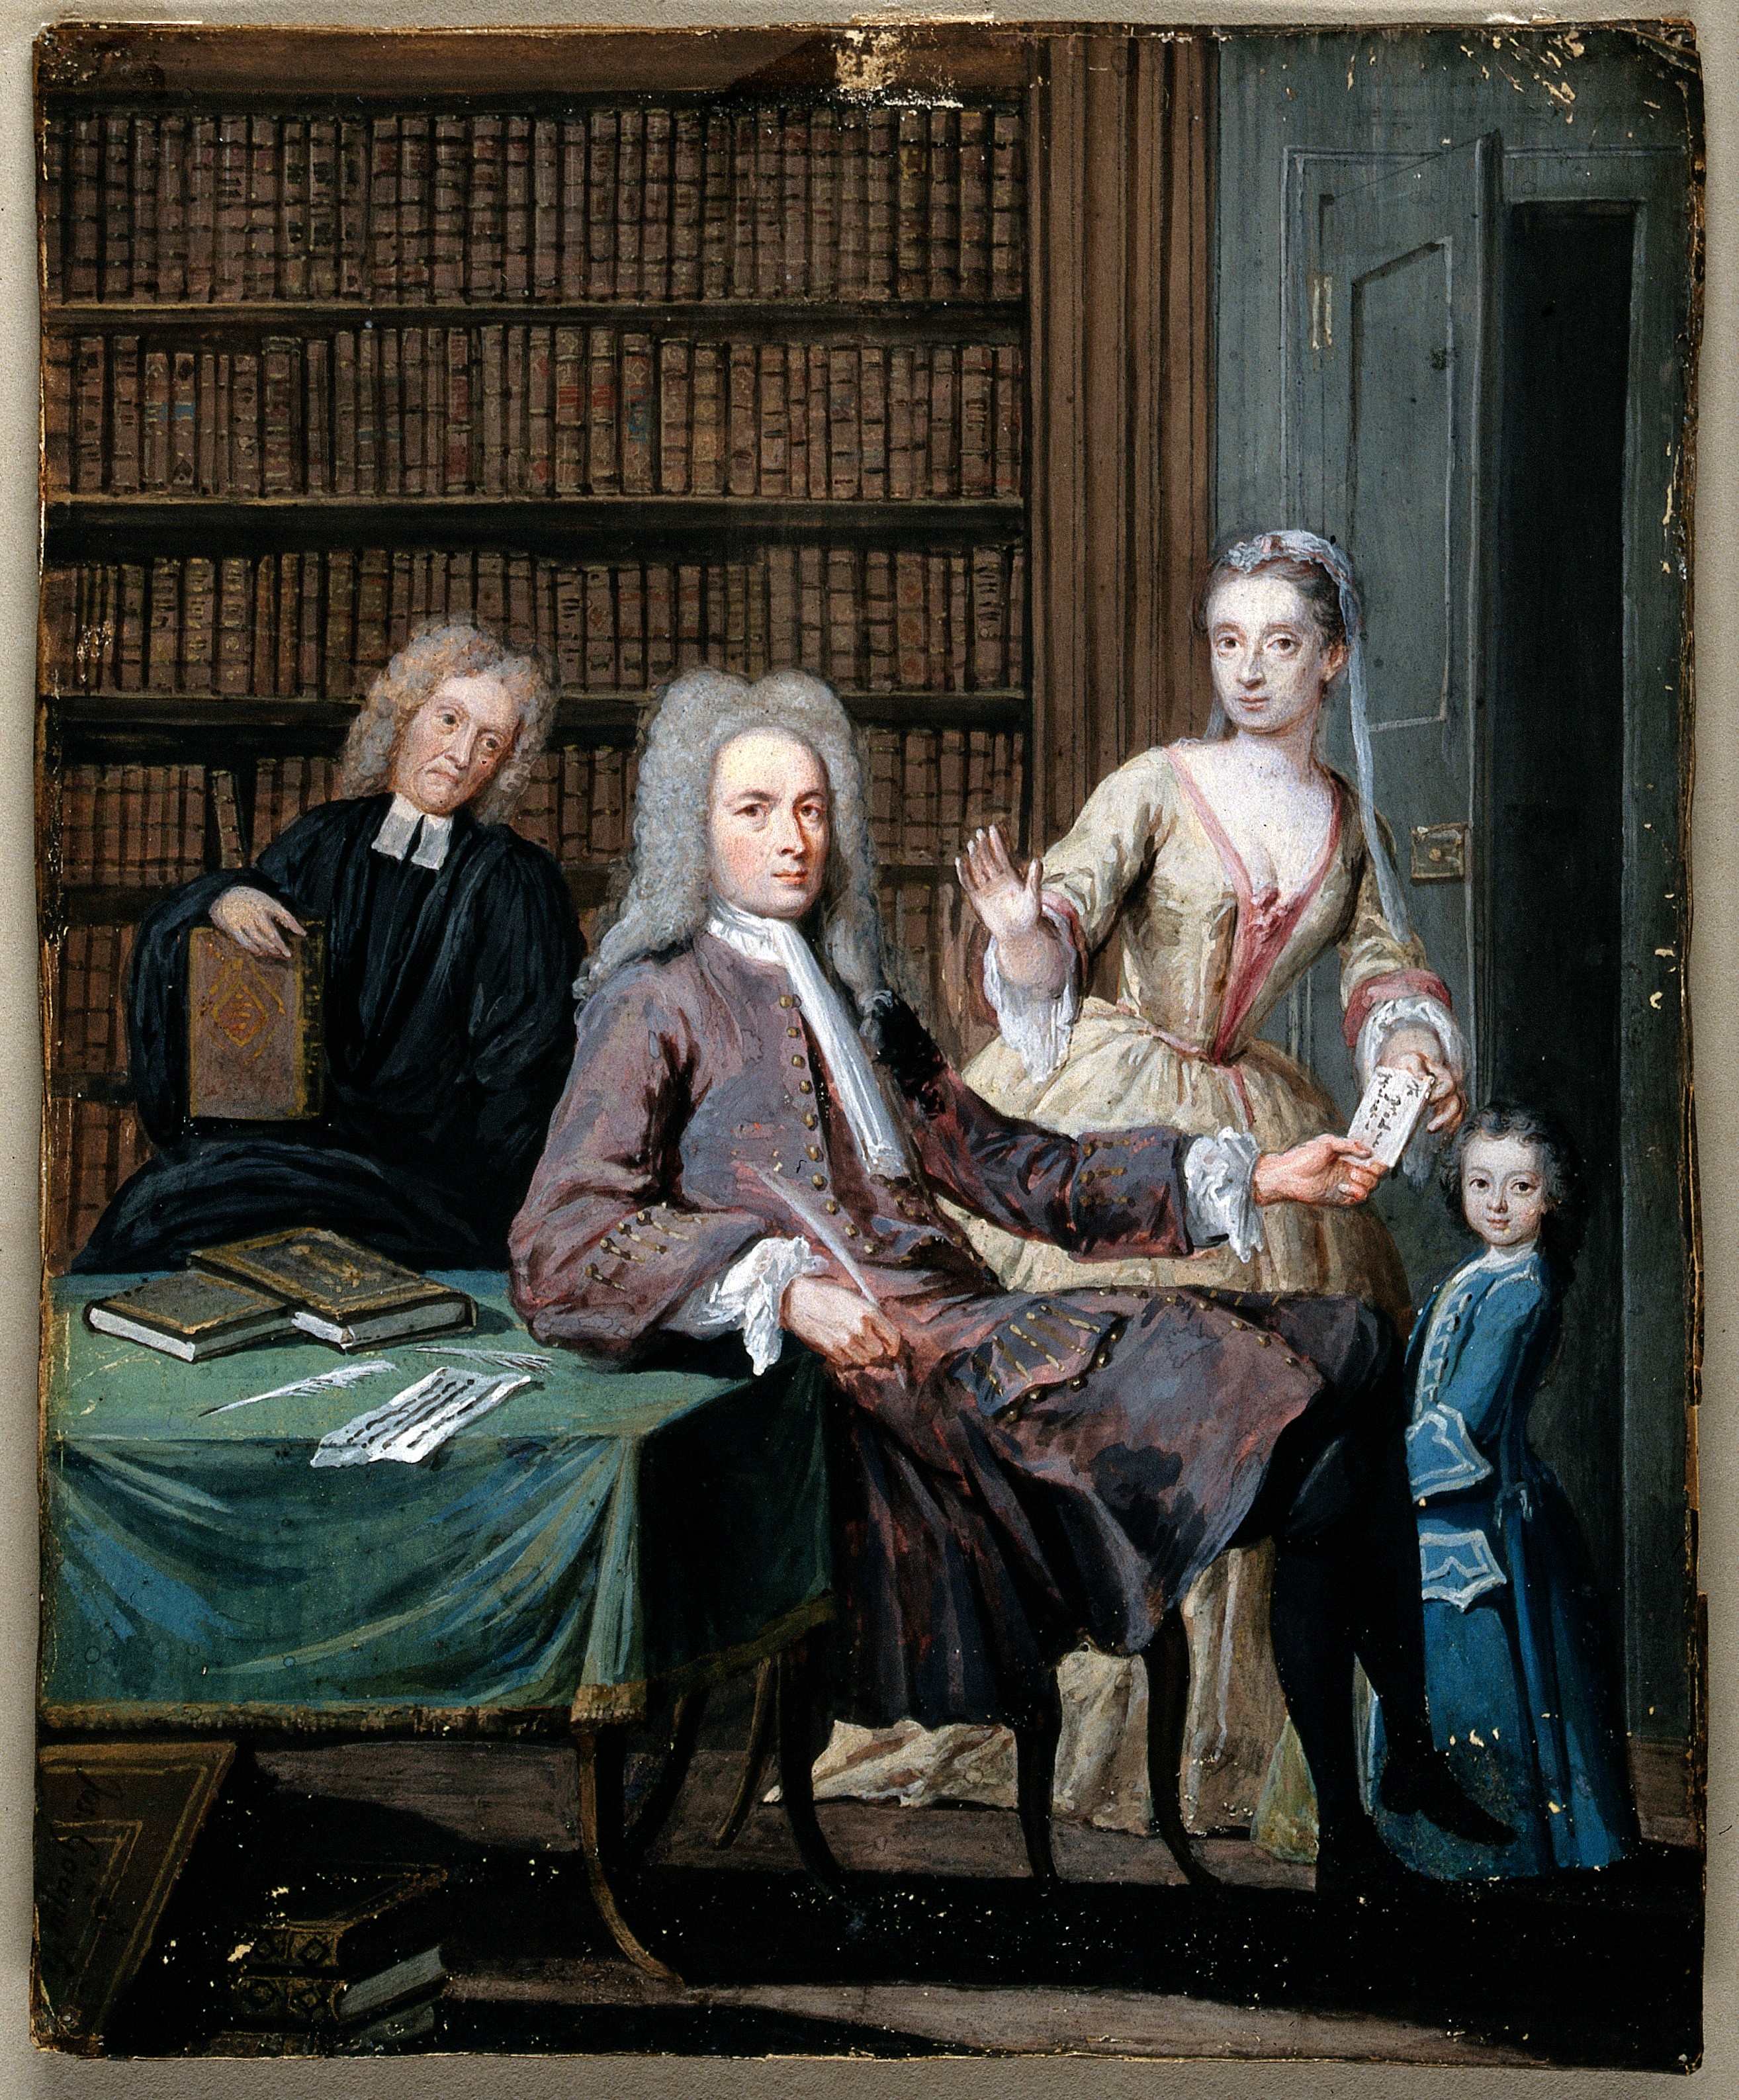 Jean Misaubin and his family. Gouache painting by Joseph Gou Wellcome V0048053